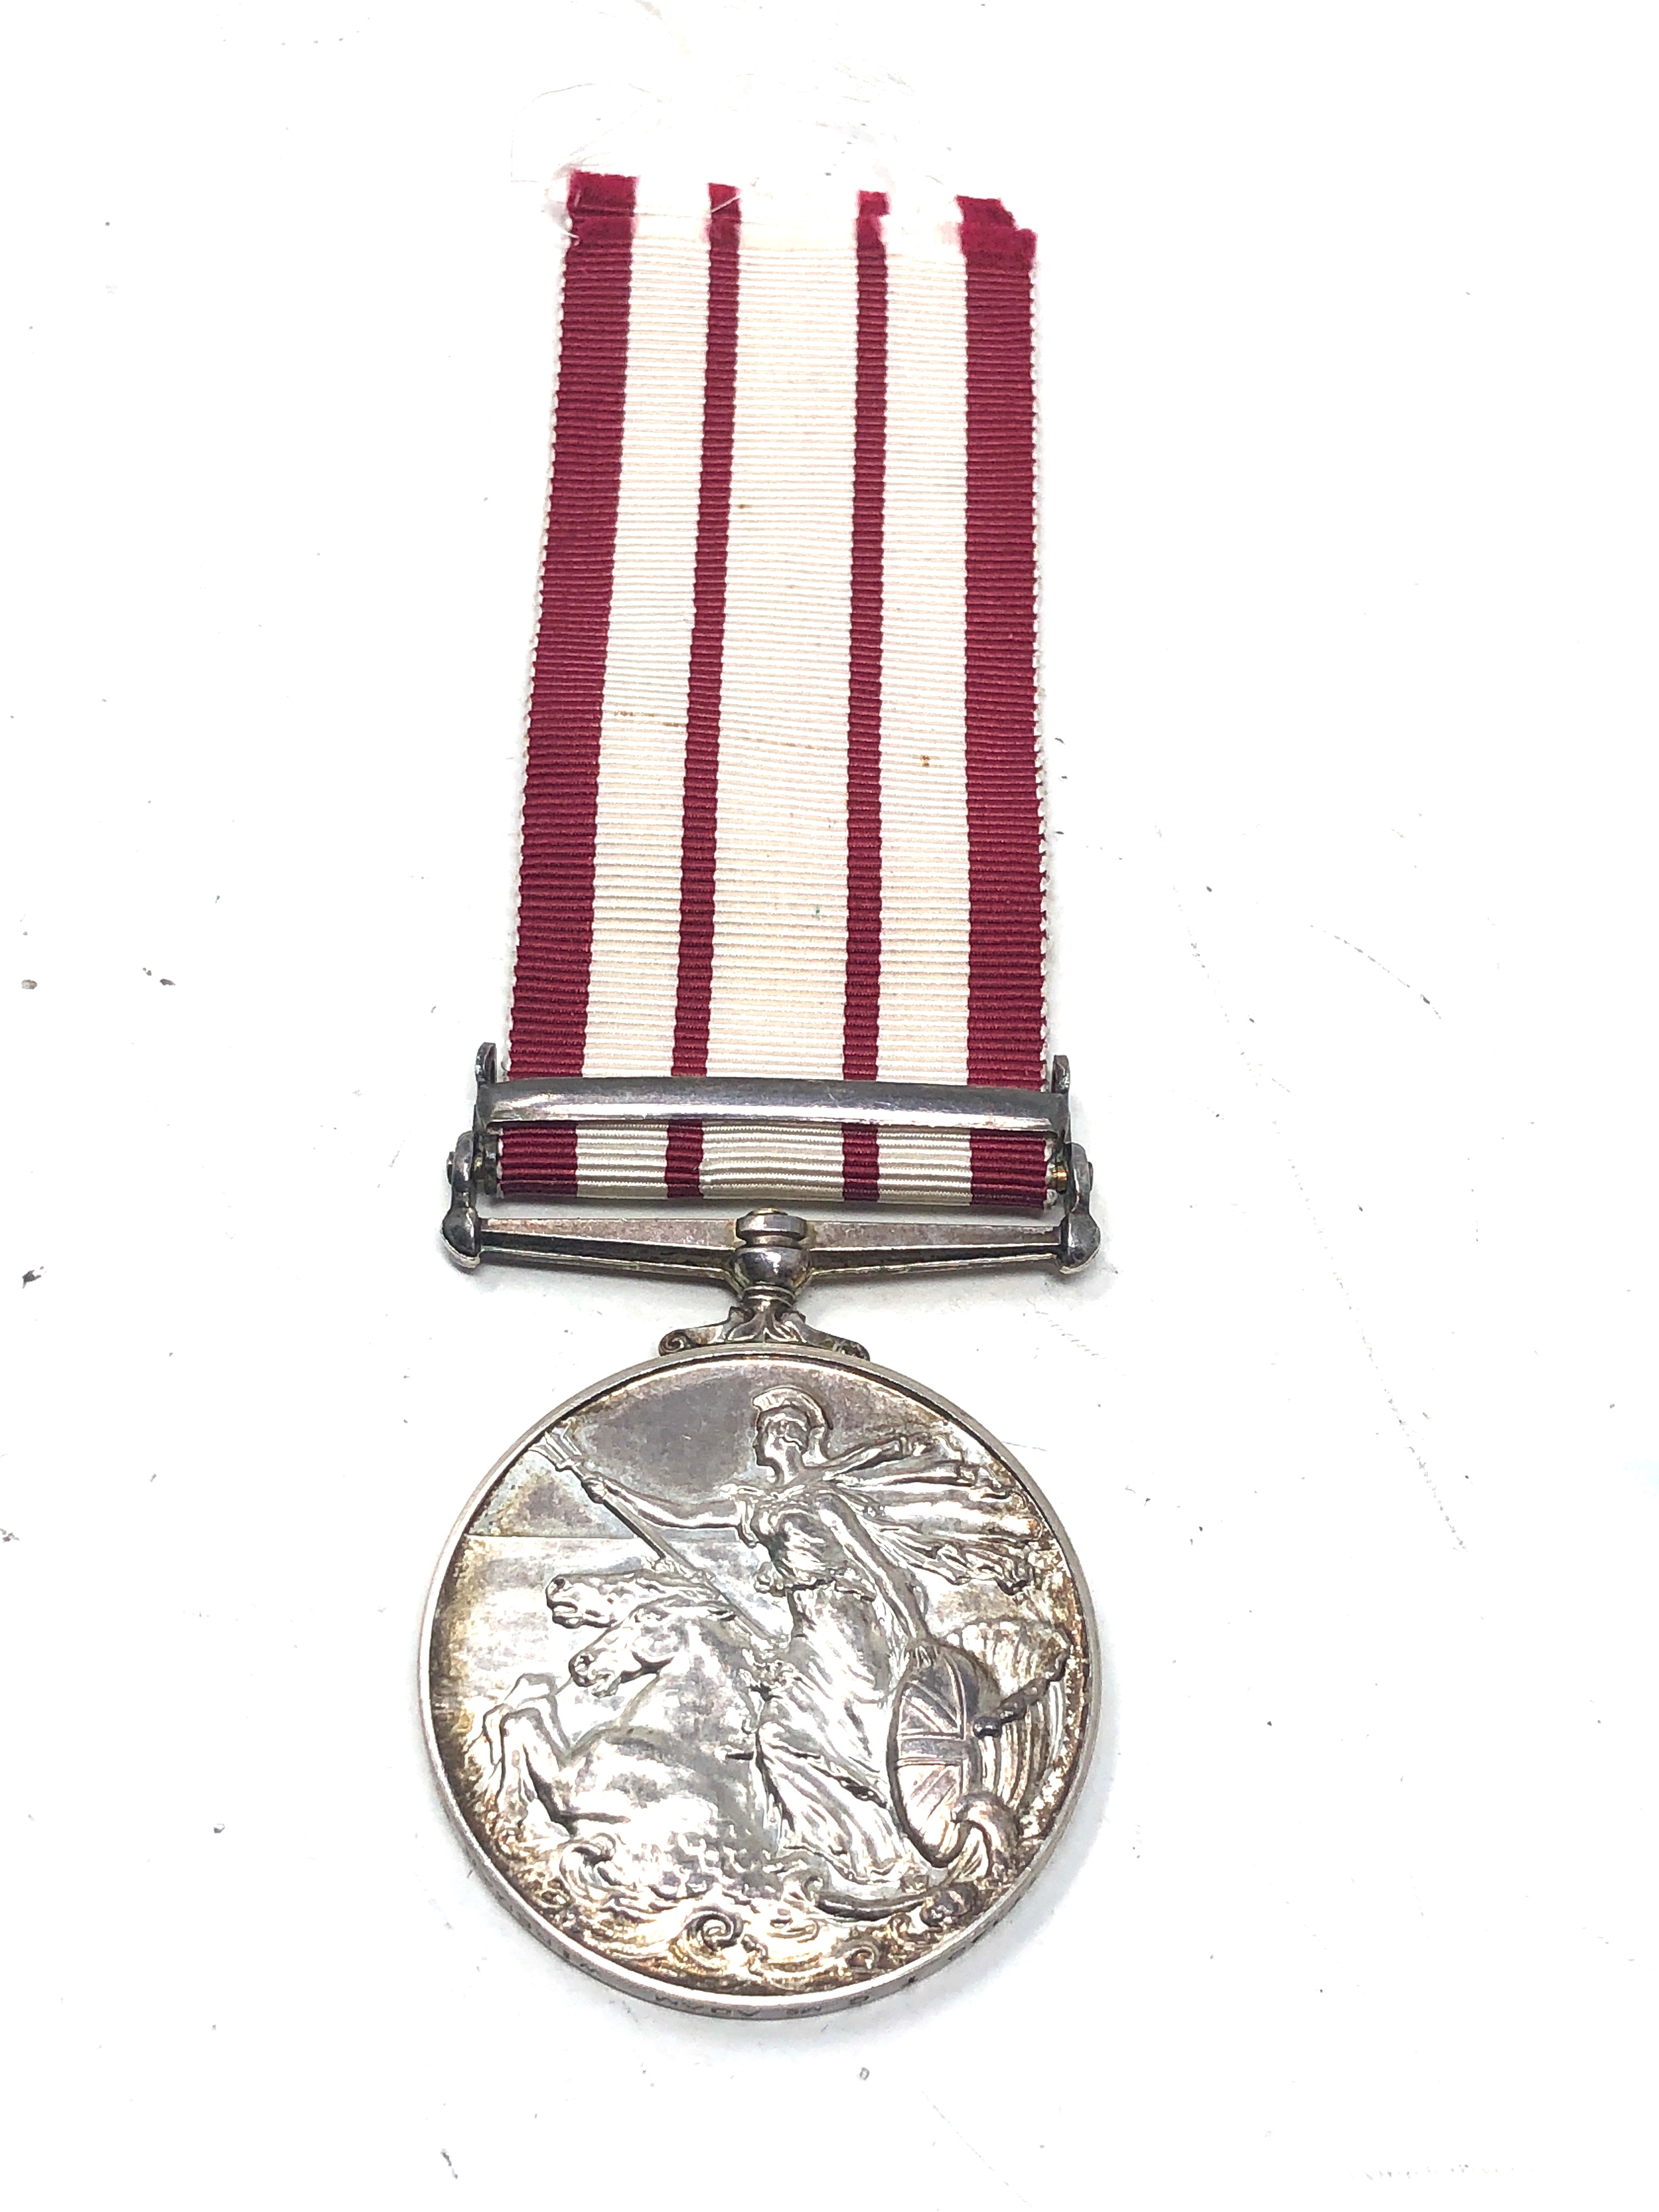 GV.1 naval general service medal minesweeping 1945-51 to mx637140 t.c mc adam wireman rn - Image 2 of 3